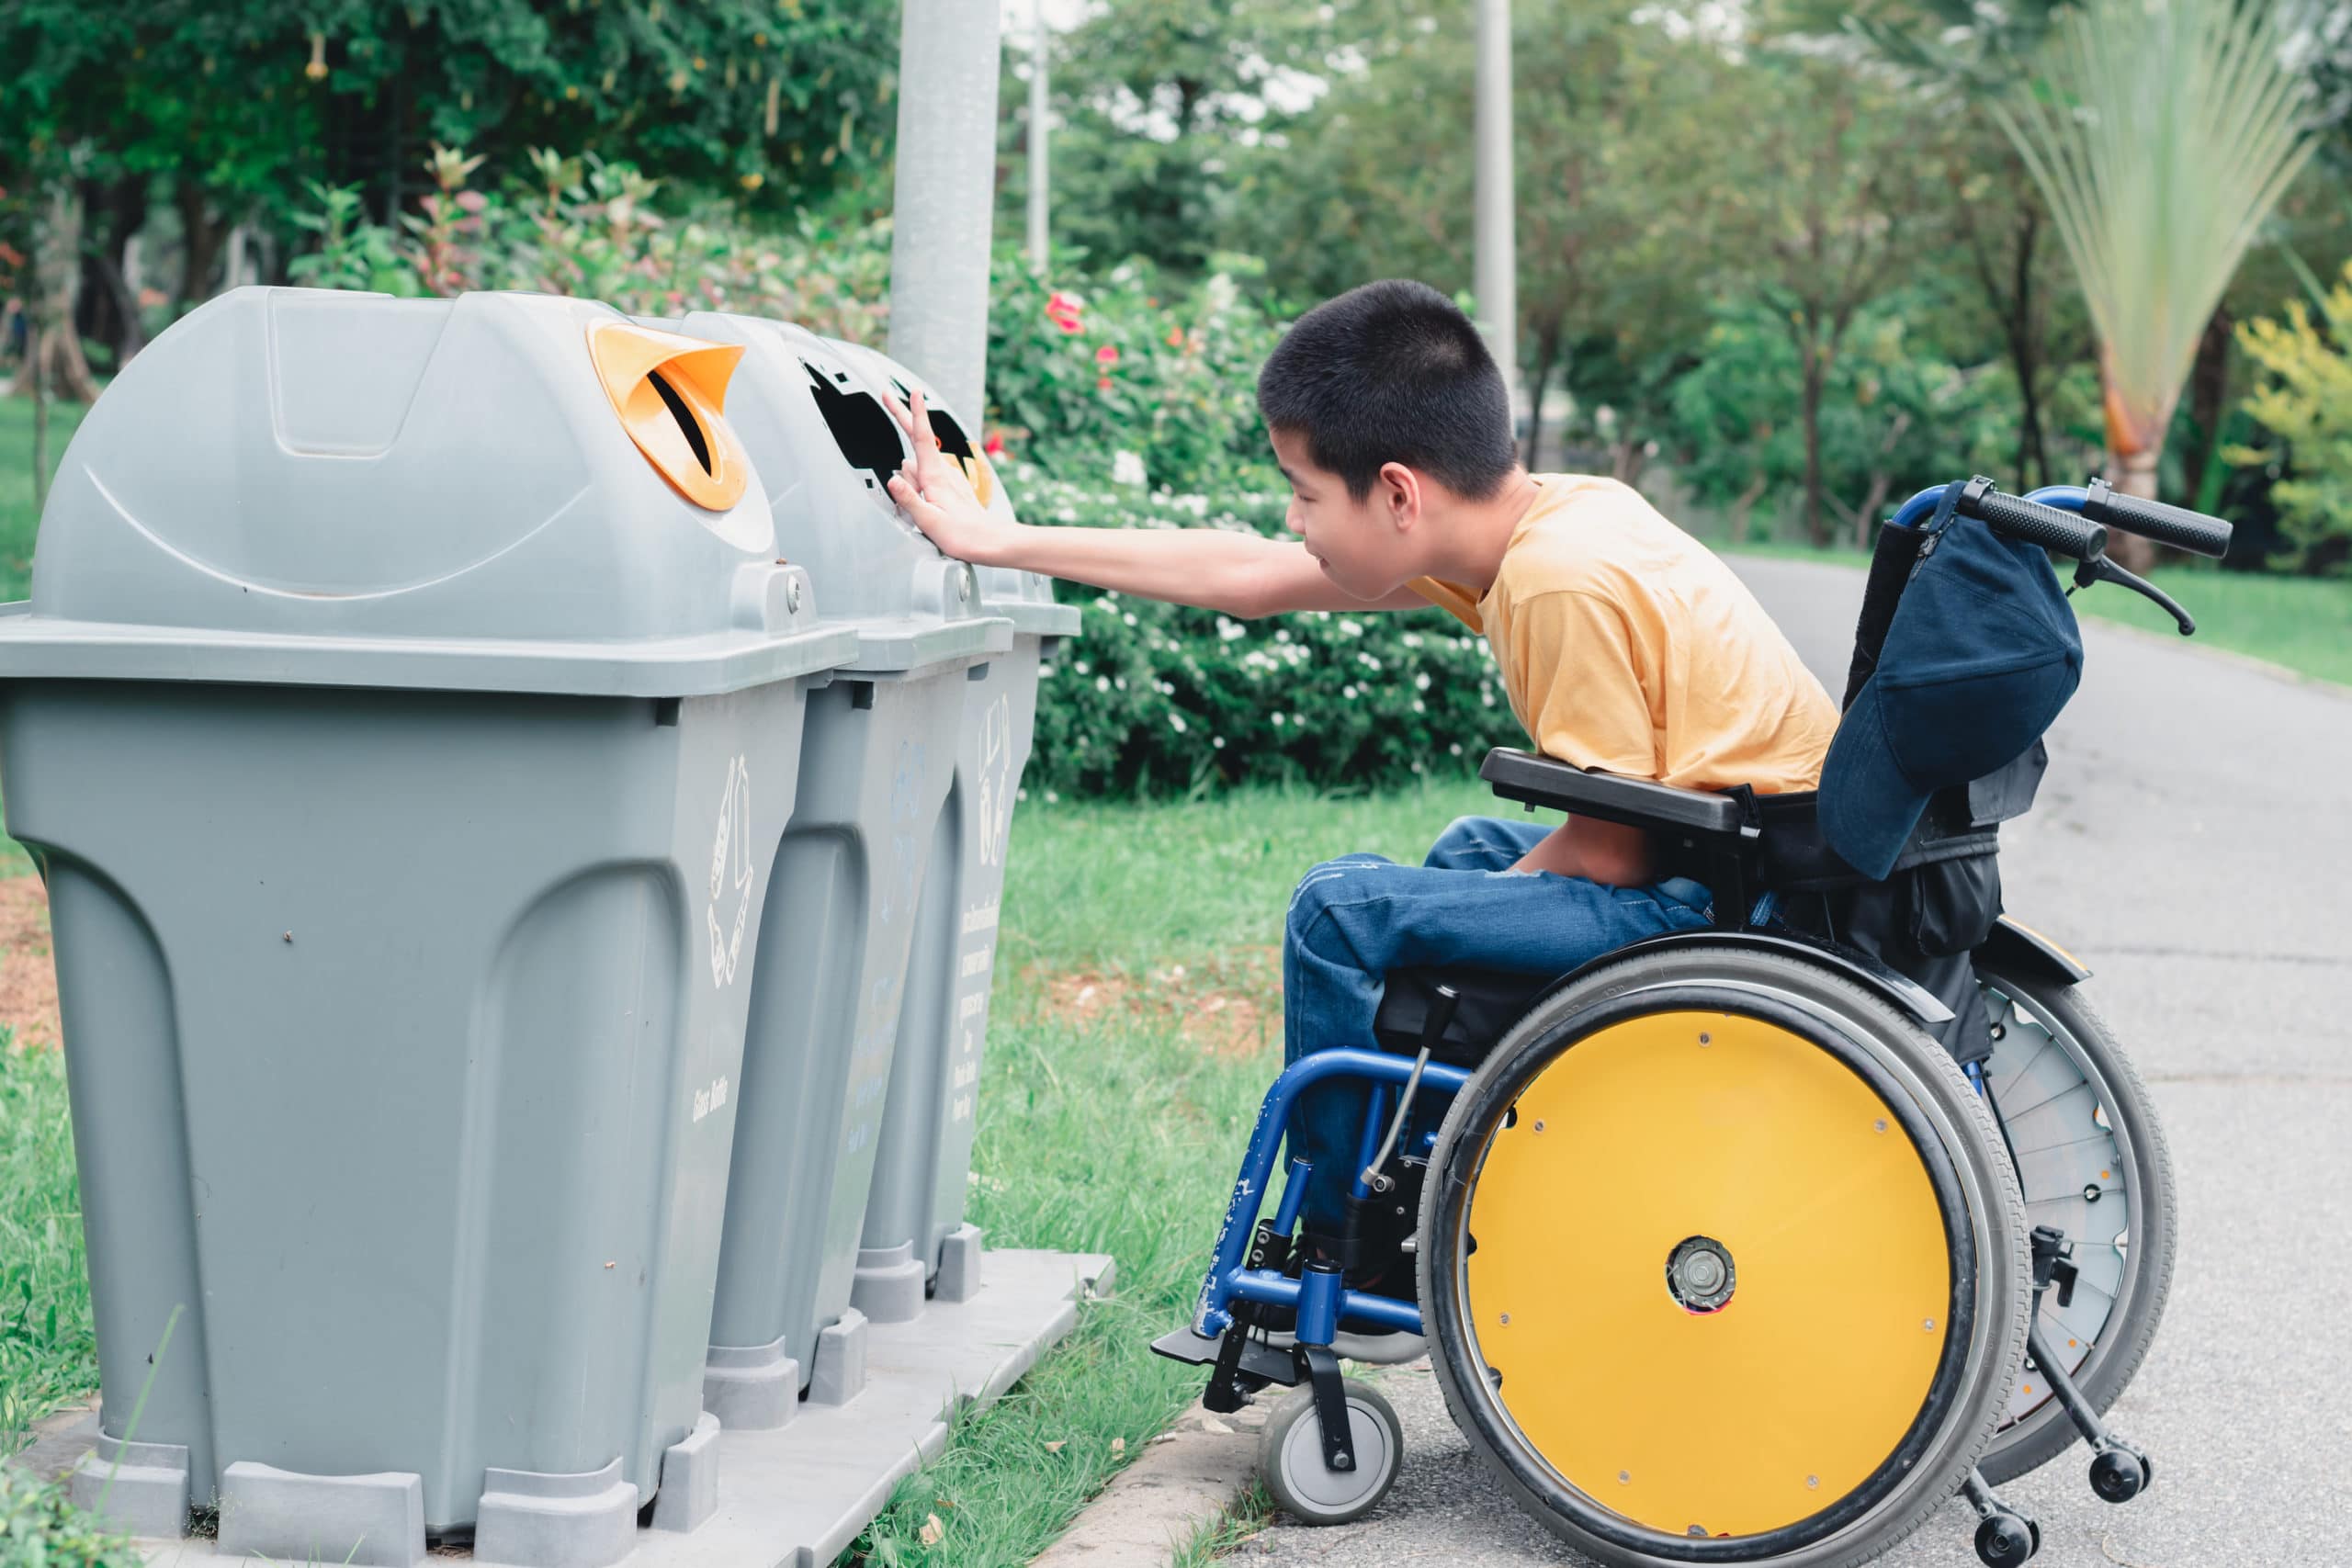 Young boy in wheelchair with yellow wheels reaches from his chair to put an item in one of three recycling or trash bins.